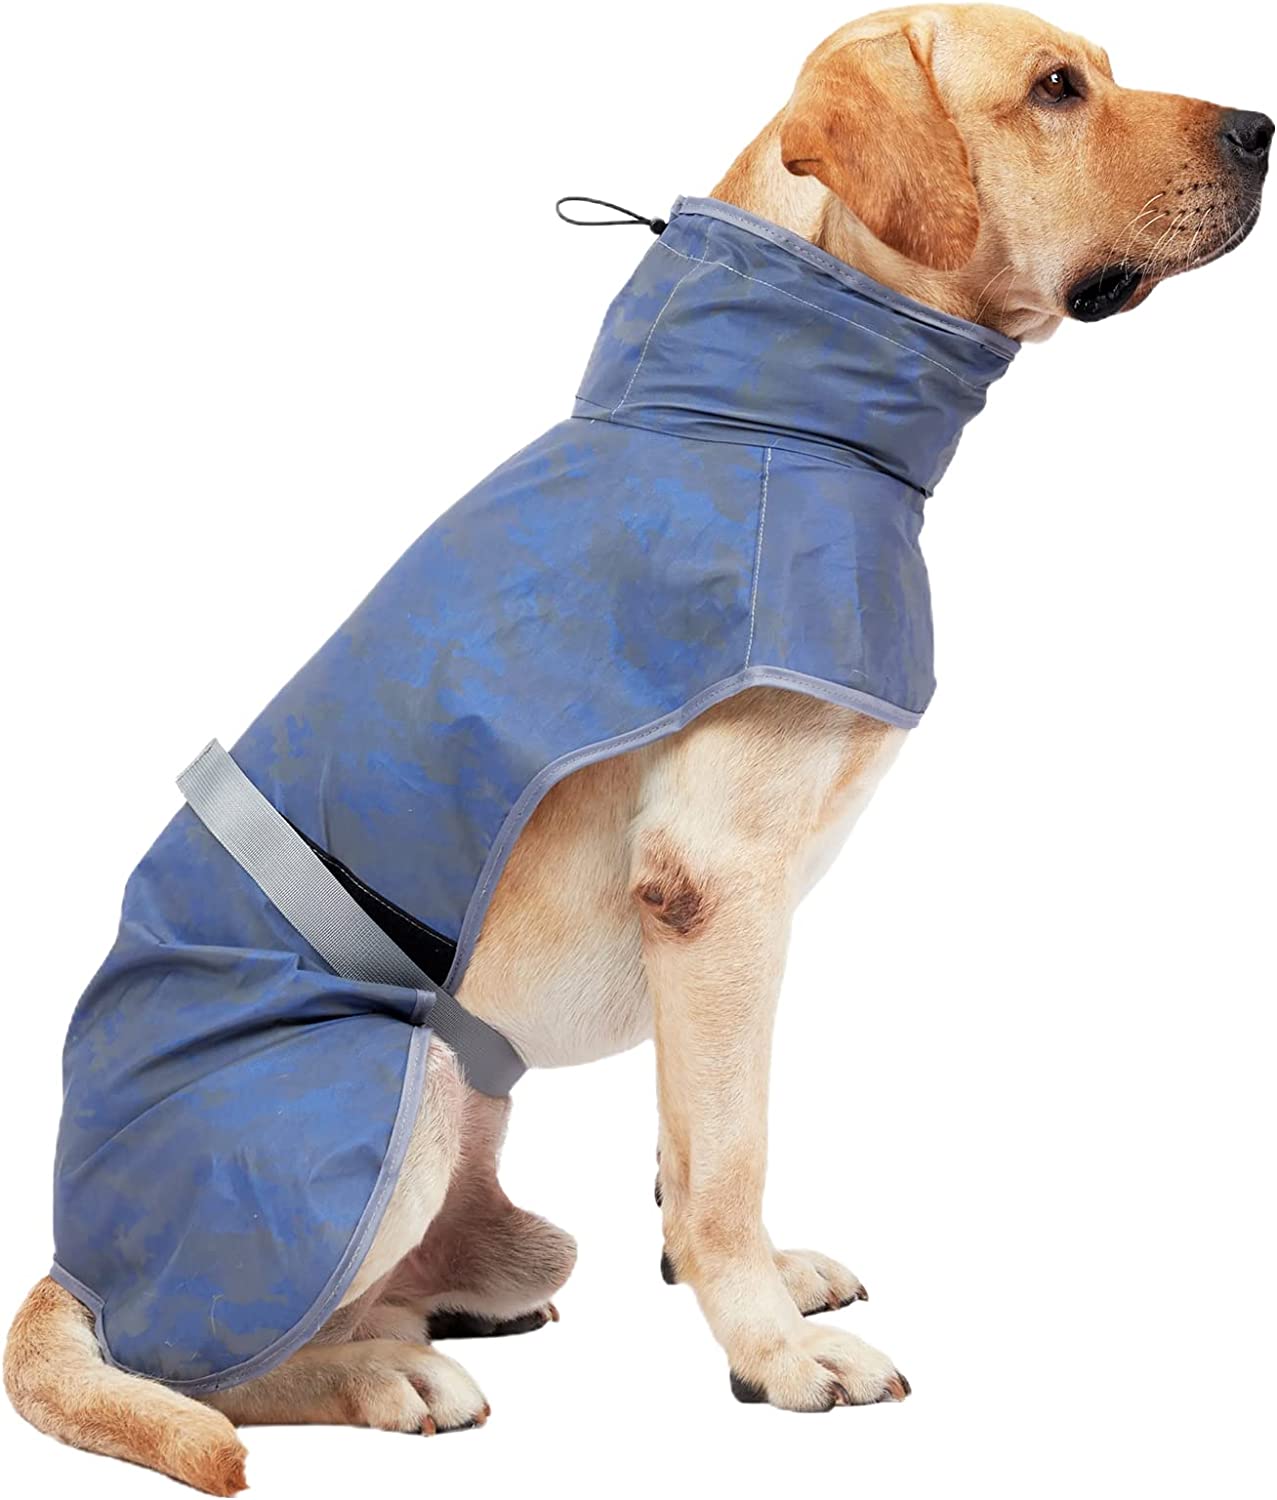 hionre Adjustable Pet Raincoat with Reflective Strip Dog Rain Jacket Lightweight Breathable Dog Rain Poncho Easy to Wear Suitable for Small Medium Dogs Blue 3XL